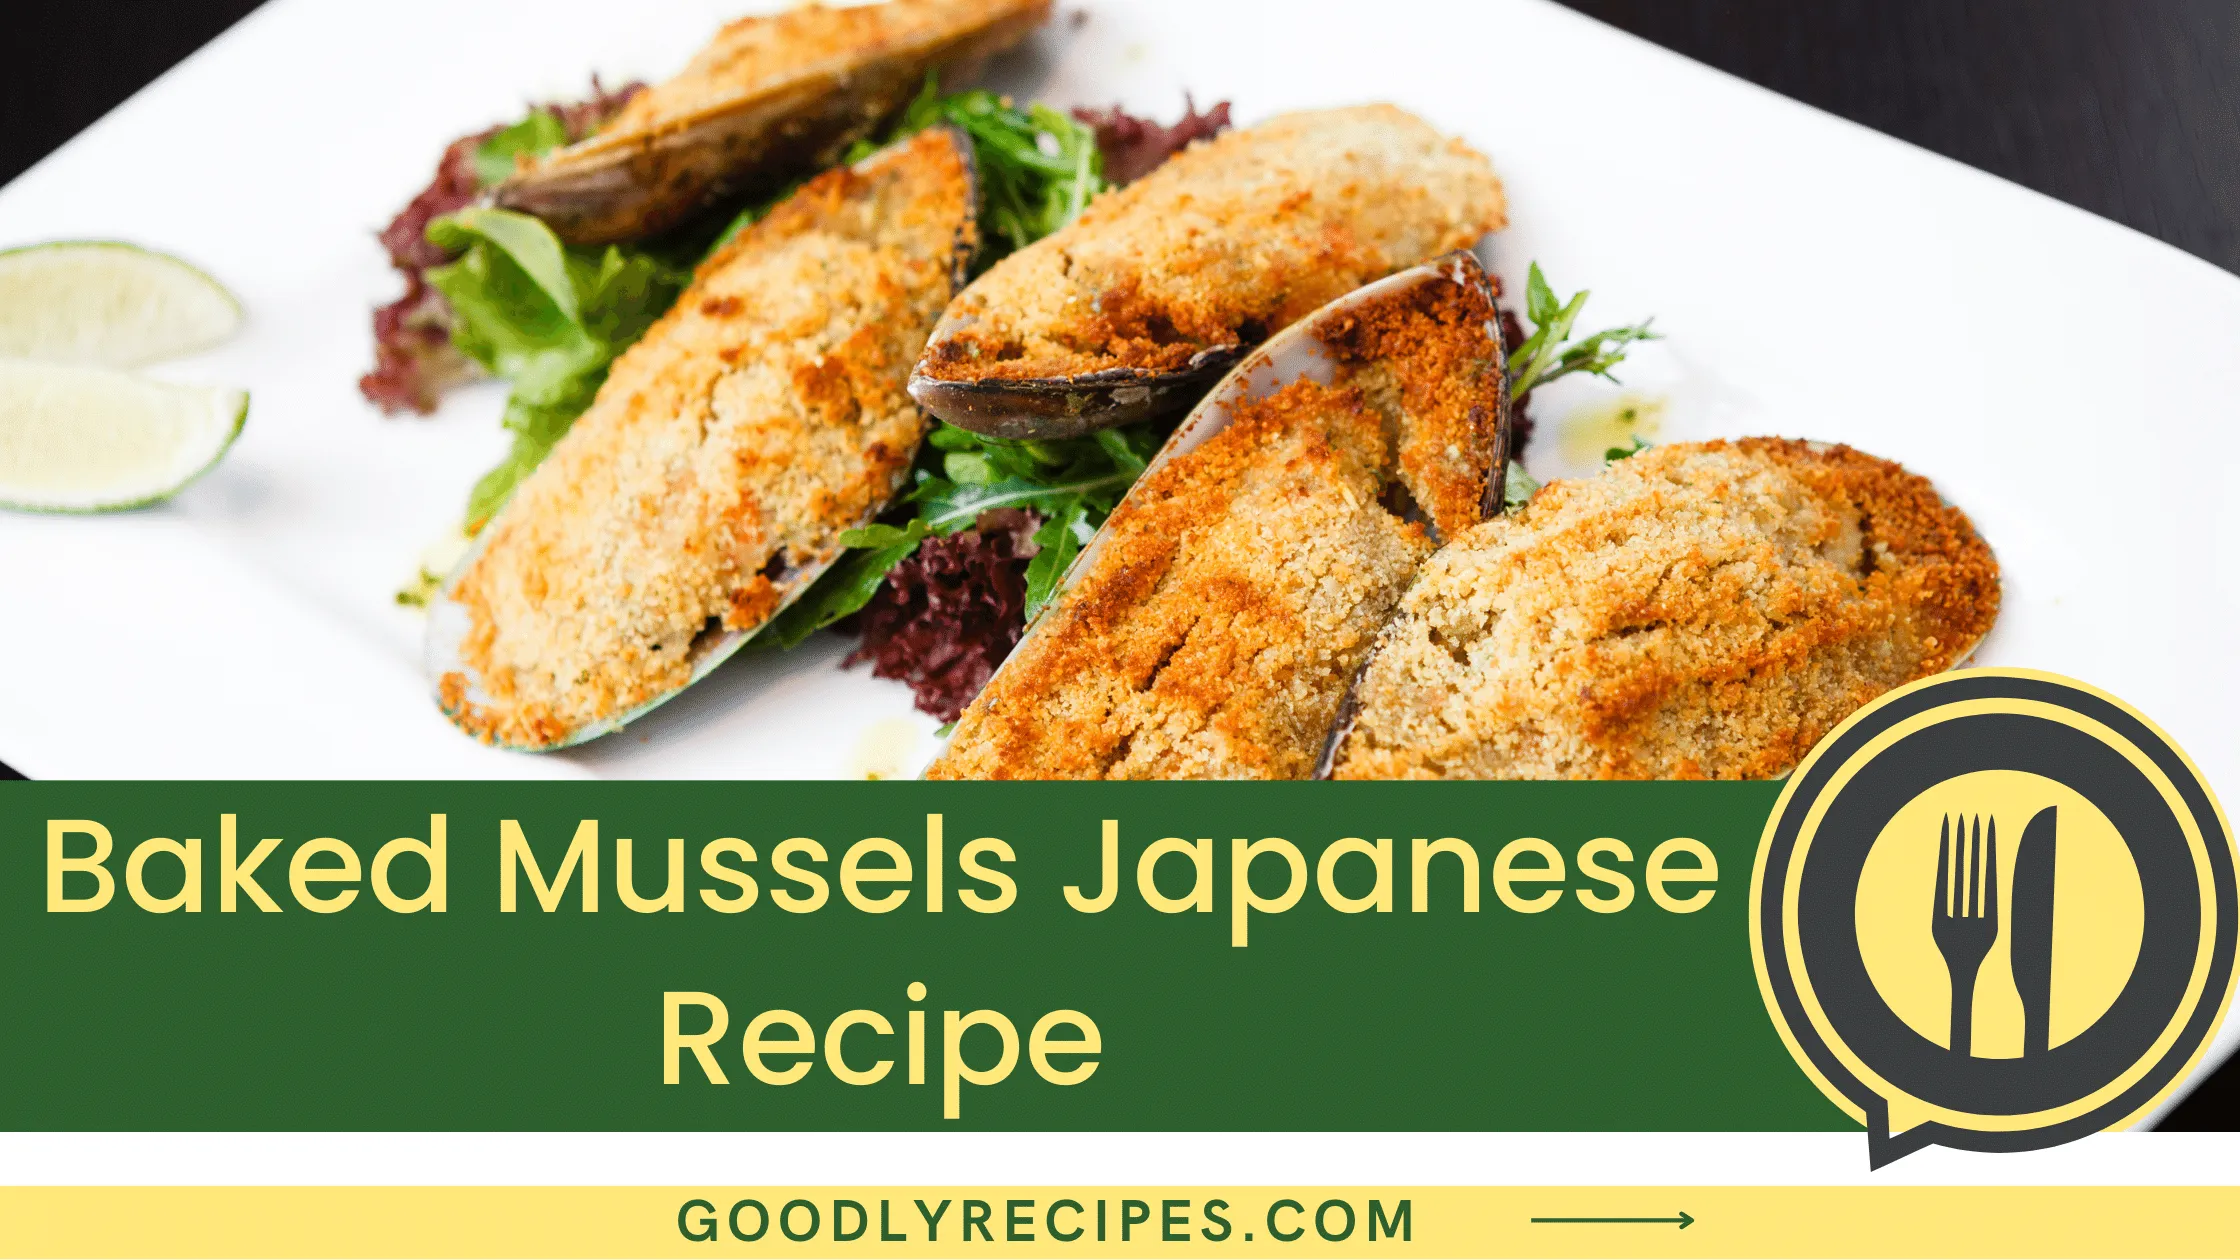 Baked Mussels Japanese Recipe